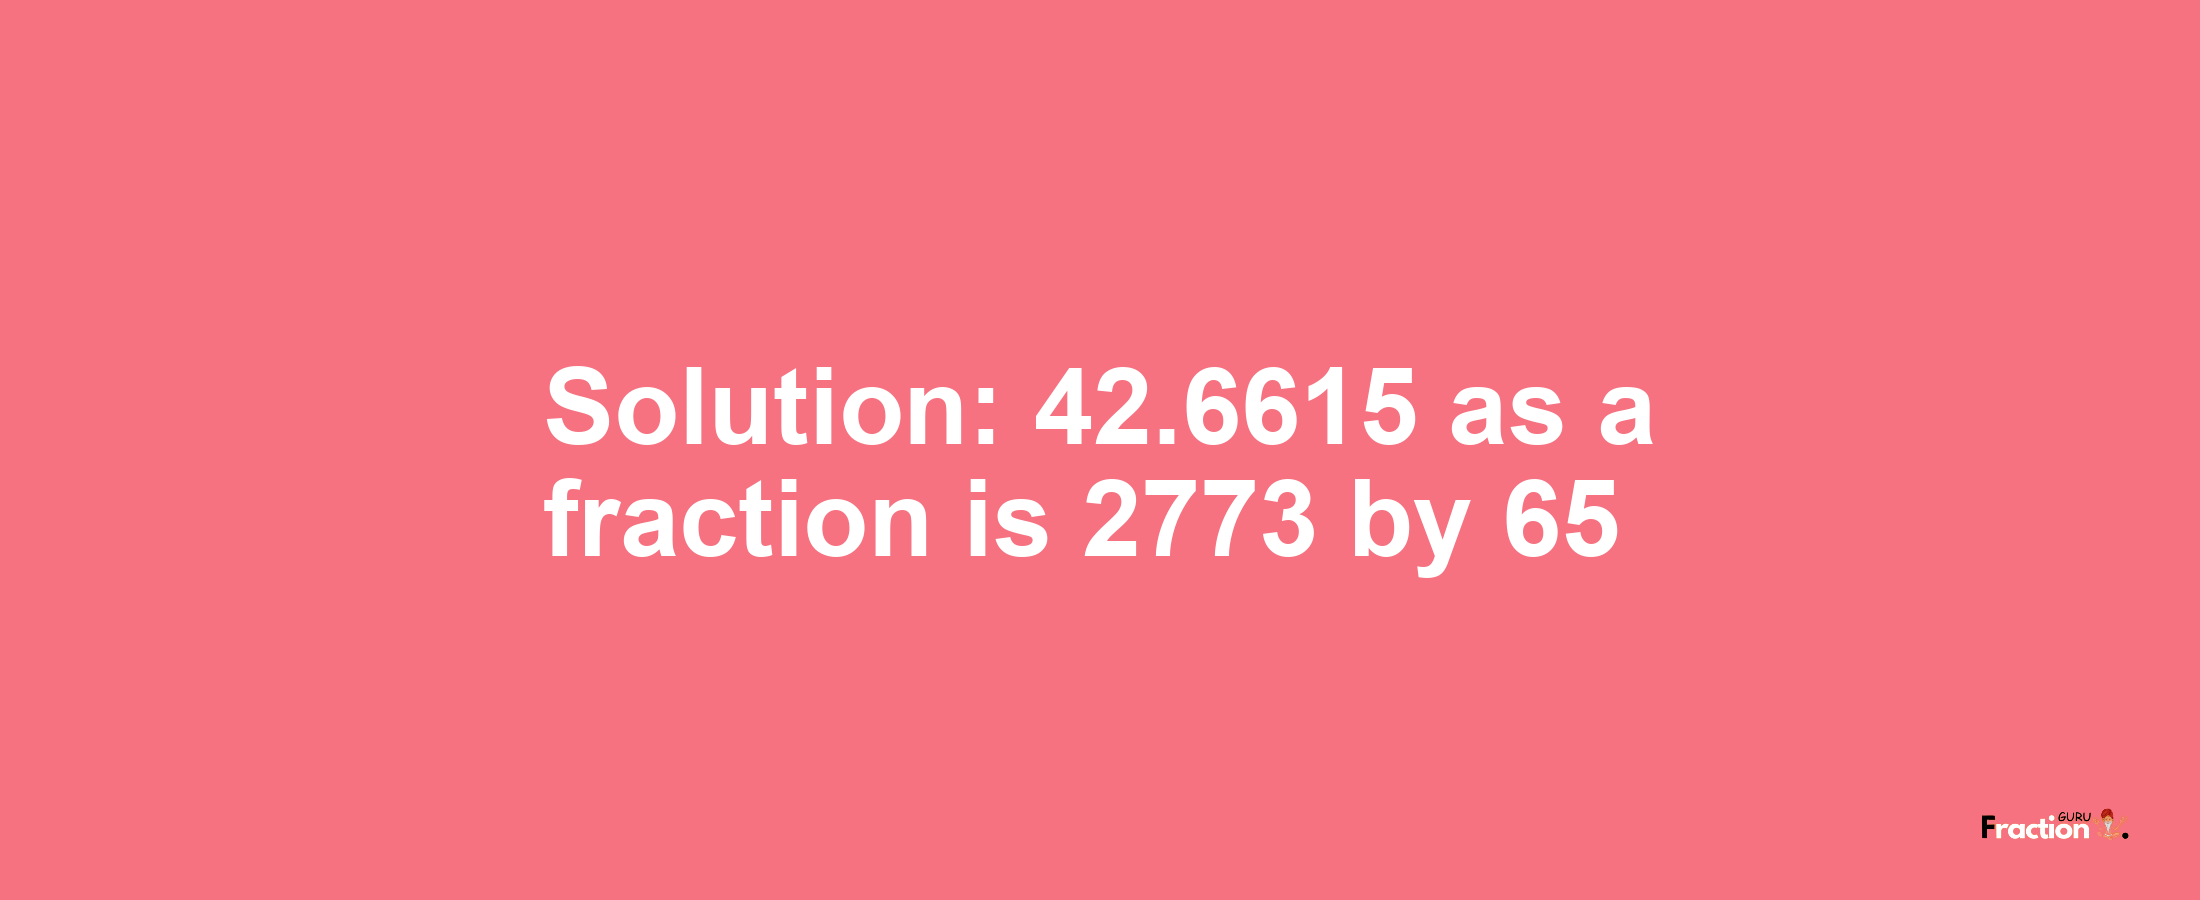 Solution:42.6615 as a fraction is 2773/65